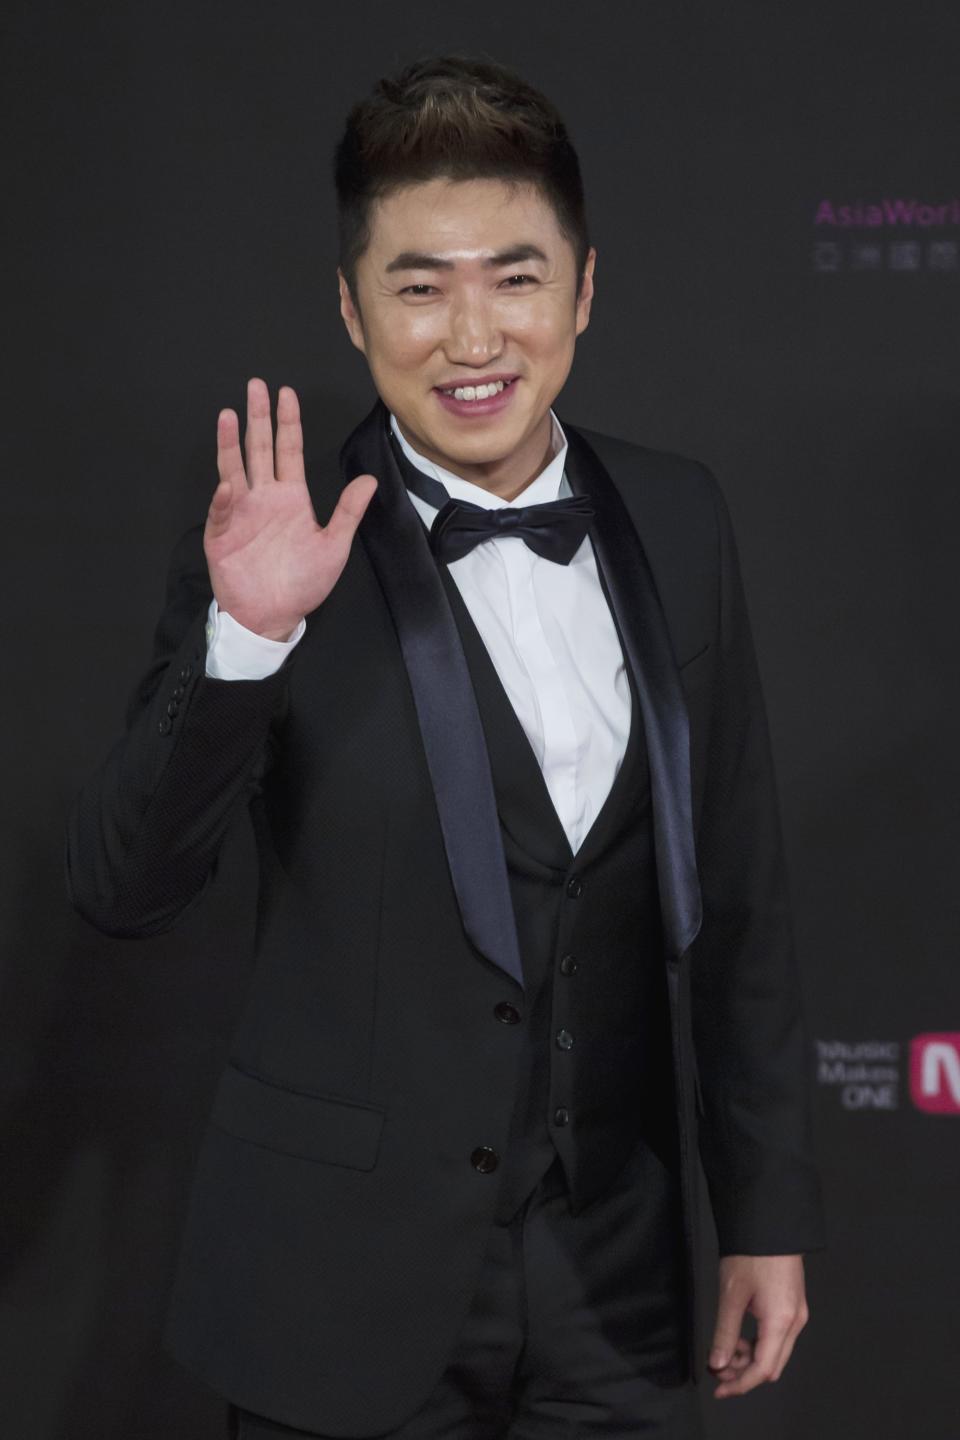 South Korean actor Jang Dong-min poses on the red carpet as he attends the 2014 Mnet Asian Music Awards (MAMA) in Hong Kong